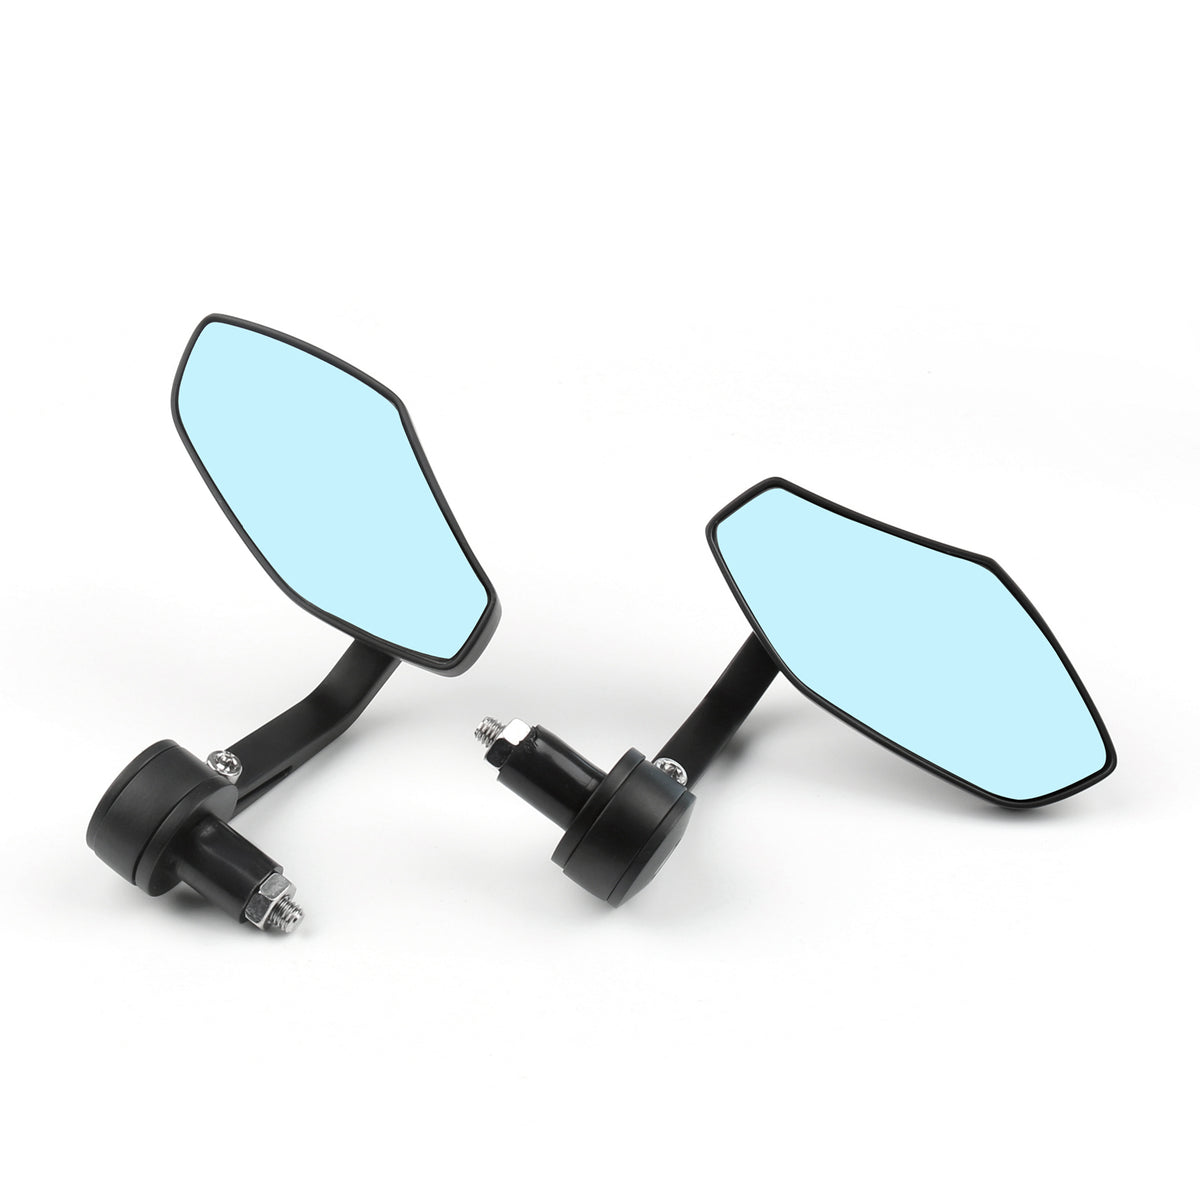 7/8" 1" Aluminum Rear View Side Mirror Handle Bar End For Motorcycle Generic